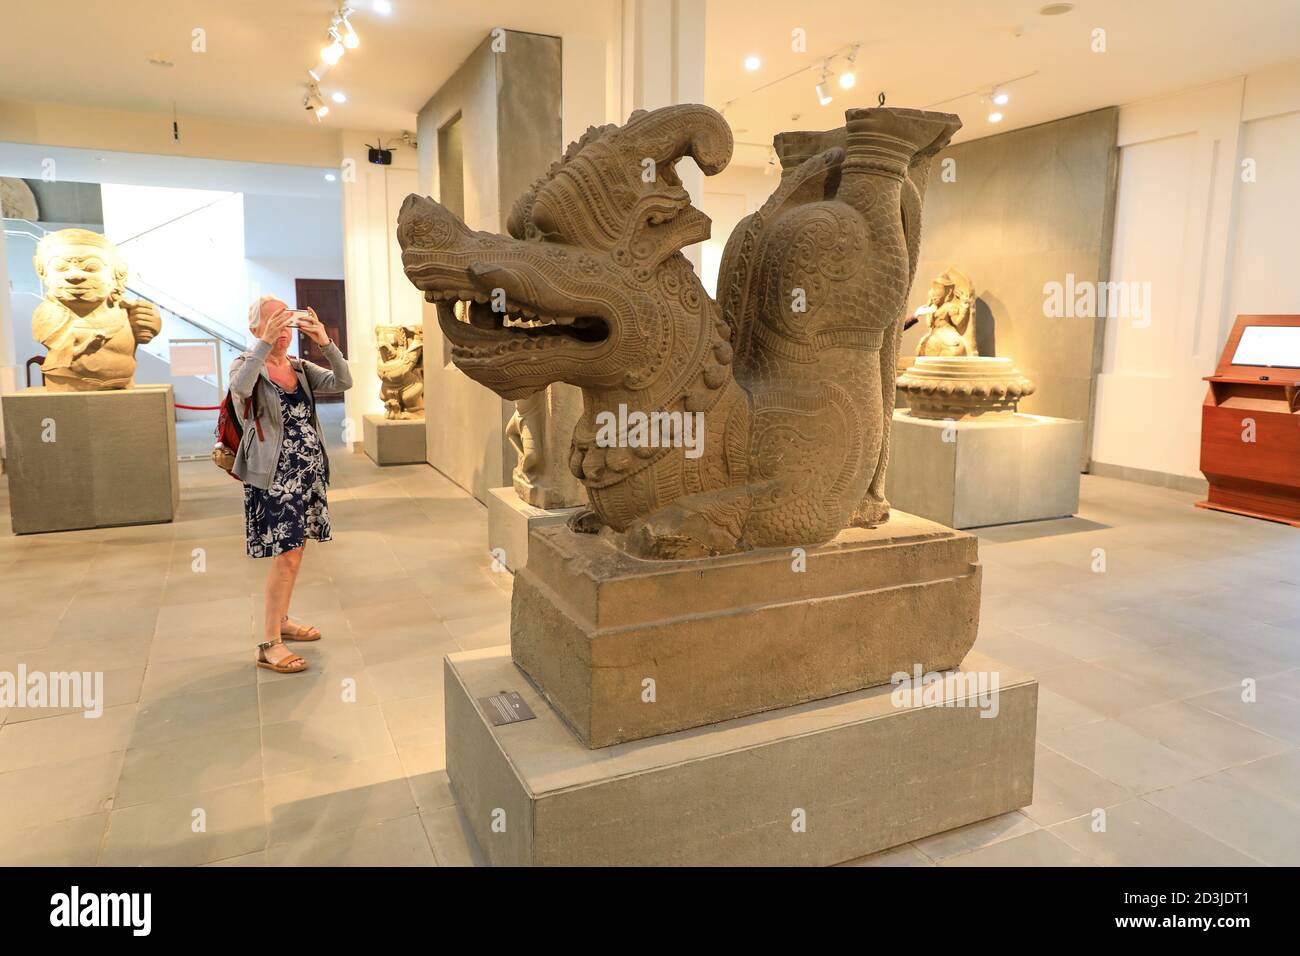 A woman taking a picture of a sculpture of a Rong or dragon at the Museum of Cham Sculpture, Danang, Vietnam, Asia Stock Photo